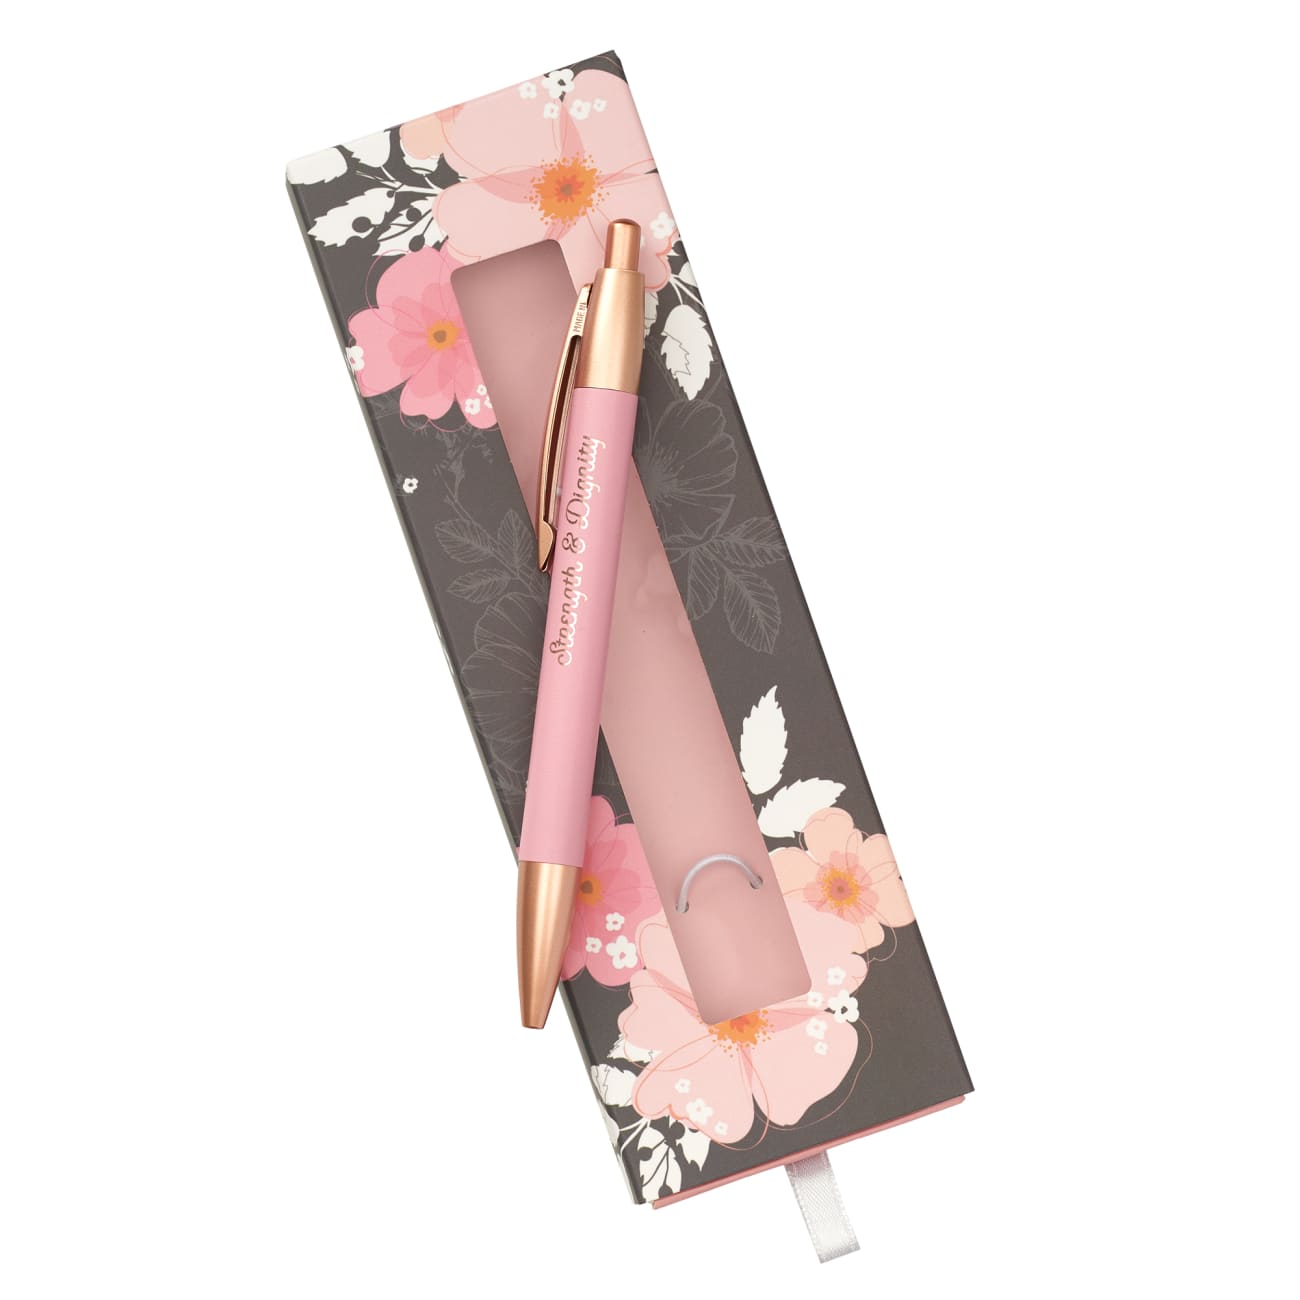 Ballpoint Pen in Gift Box: Strength & Dignity, Pink Flowers (Proverbs 31:25) Stationery